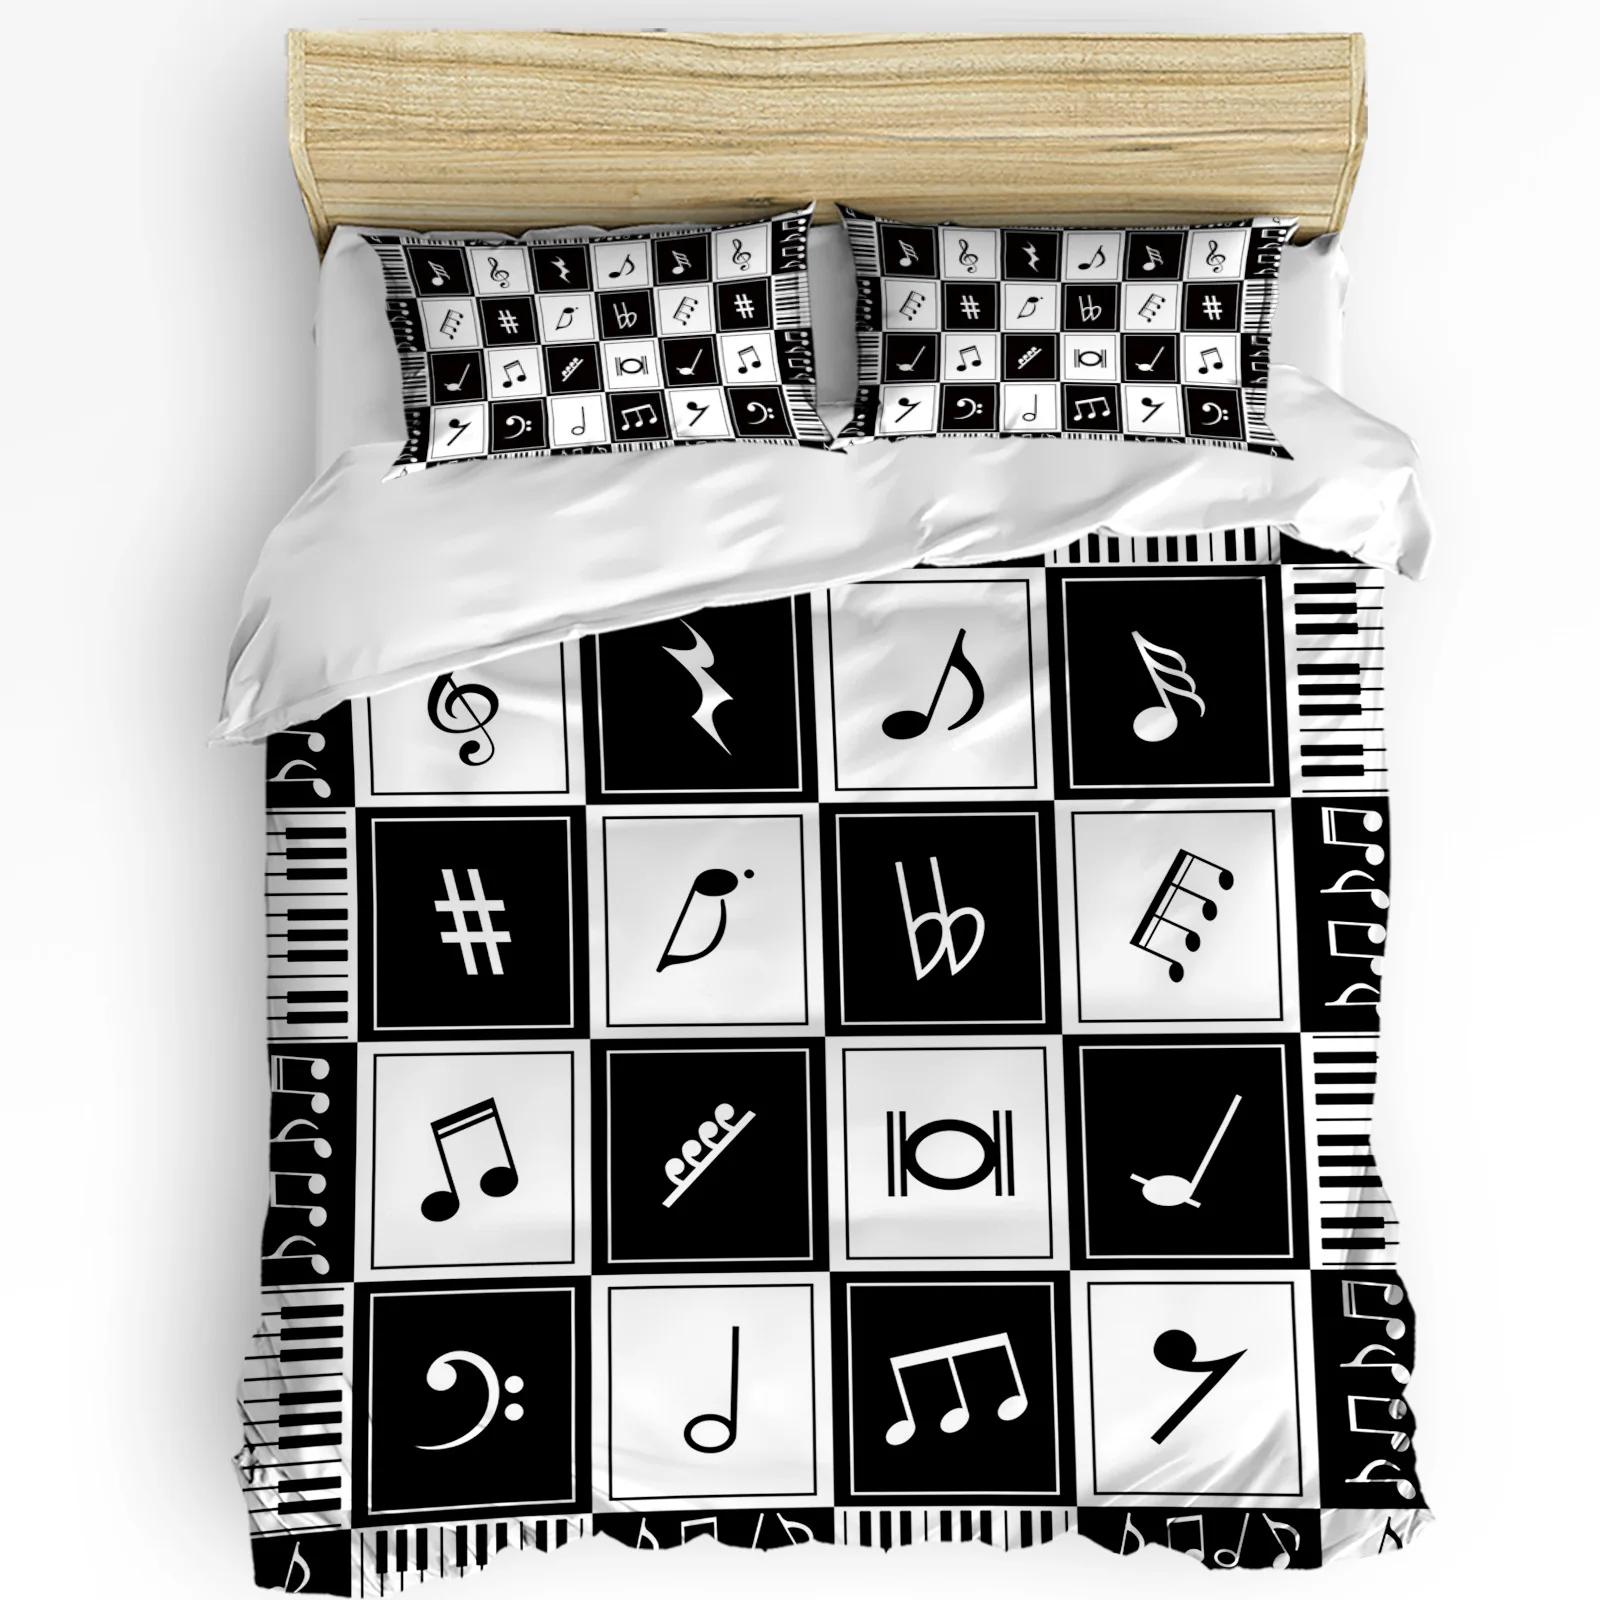 Musc Piano Keys Black White Duvet Cover Bed Bedding Set Home Textile Quilt Cover Pillowcases Bedroom Double Bedding